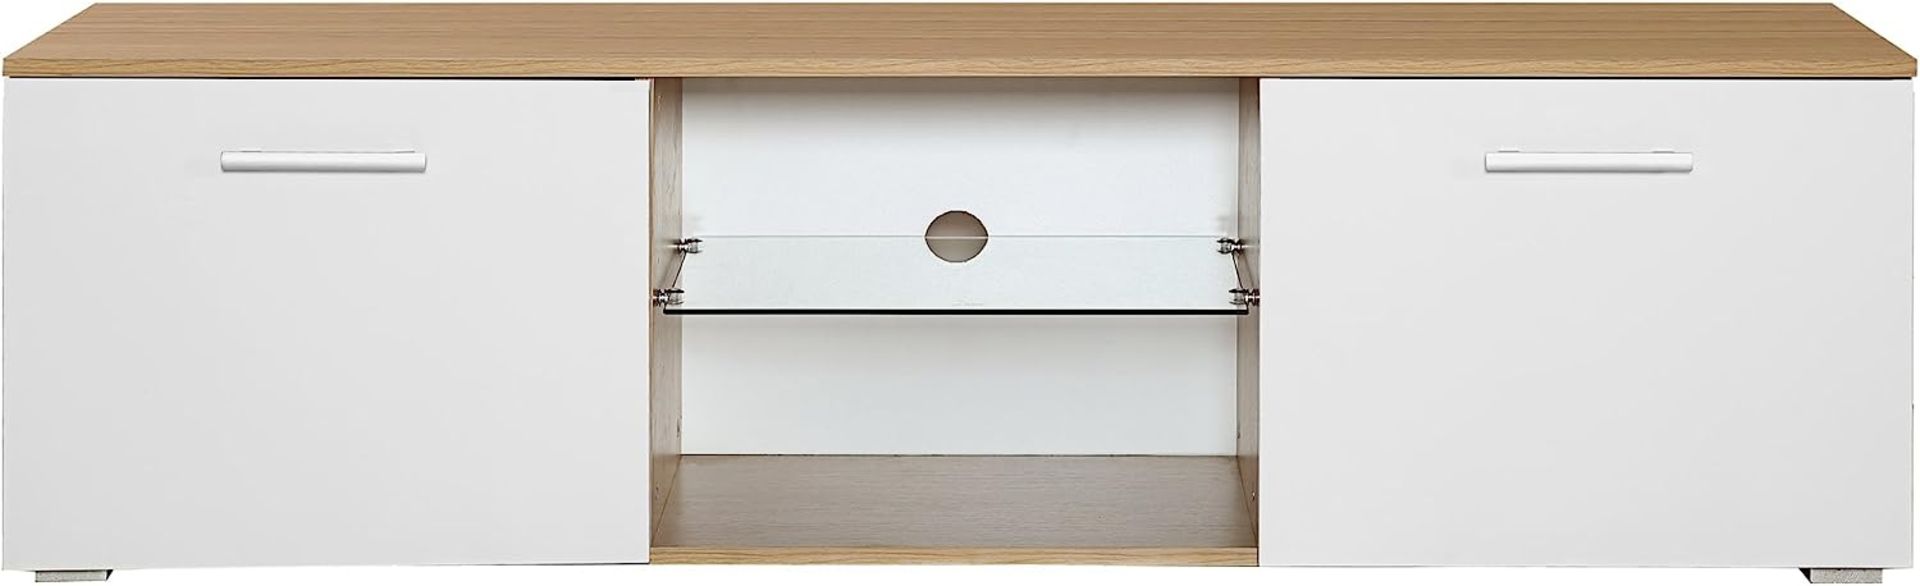 HARMIN MODERN 160CM TV STAND CABINET UNIT WITH HIGH GLOSS DOORS (WHITE ON OAK) - Image 4 of 9